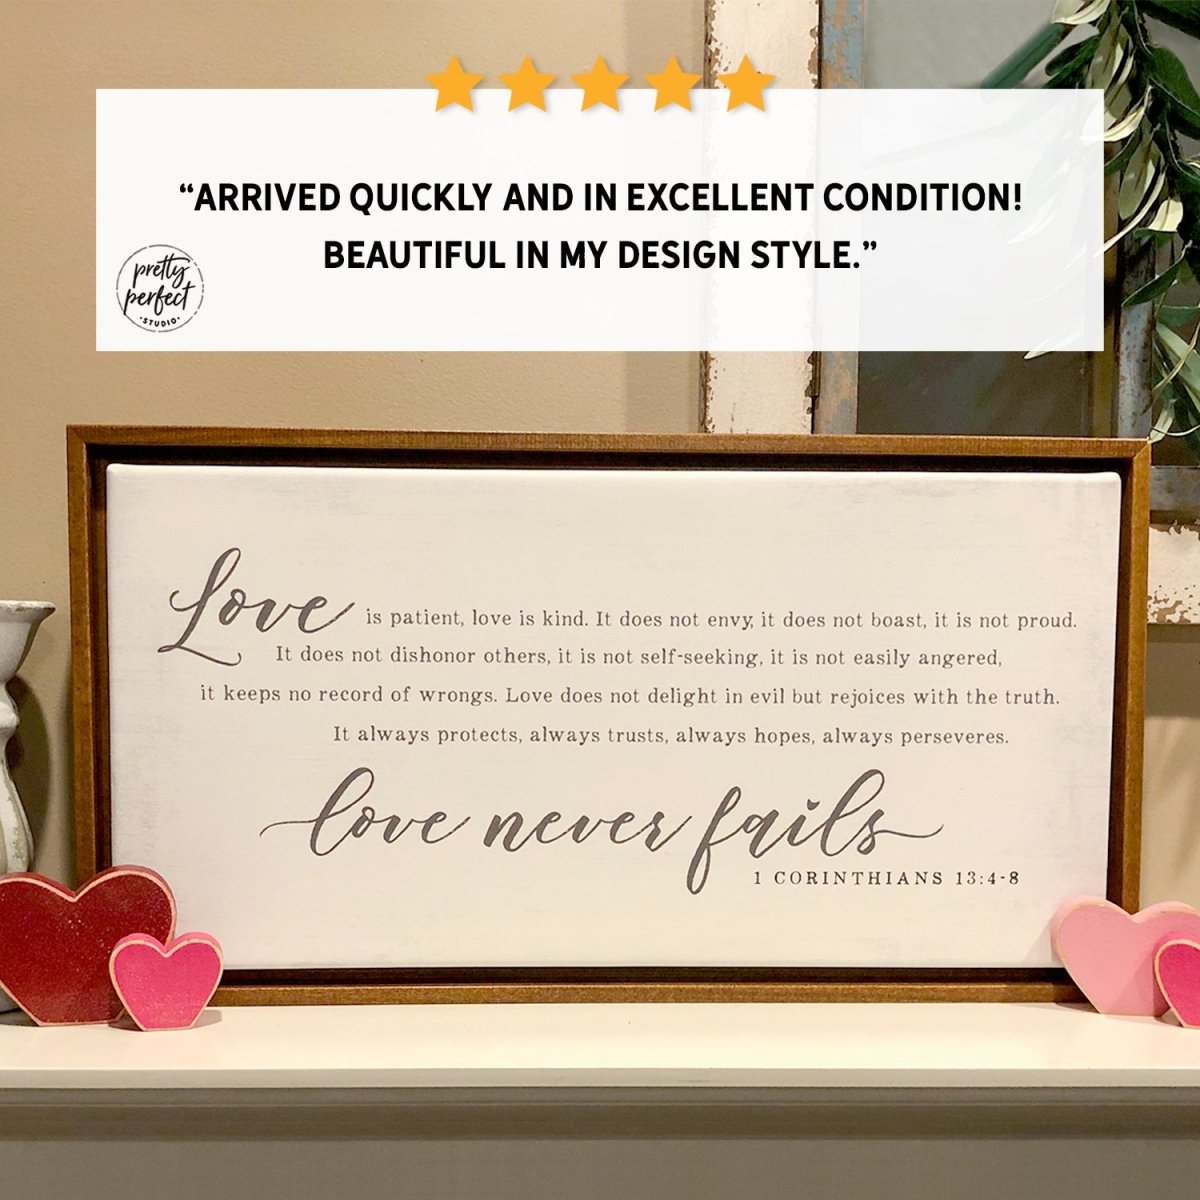 Customer product review for love is patient love is kind sign by Pretty Perfect Studio